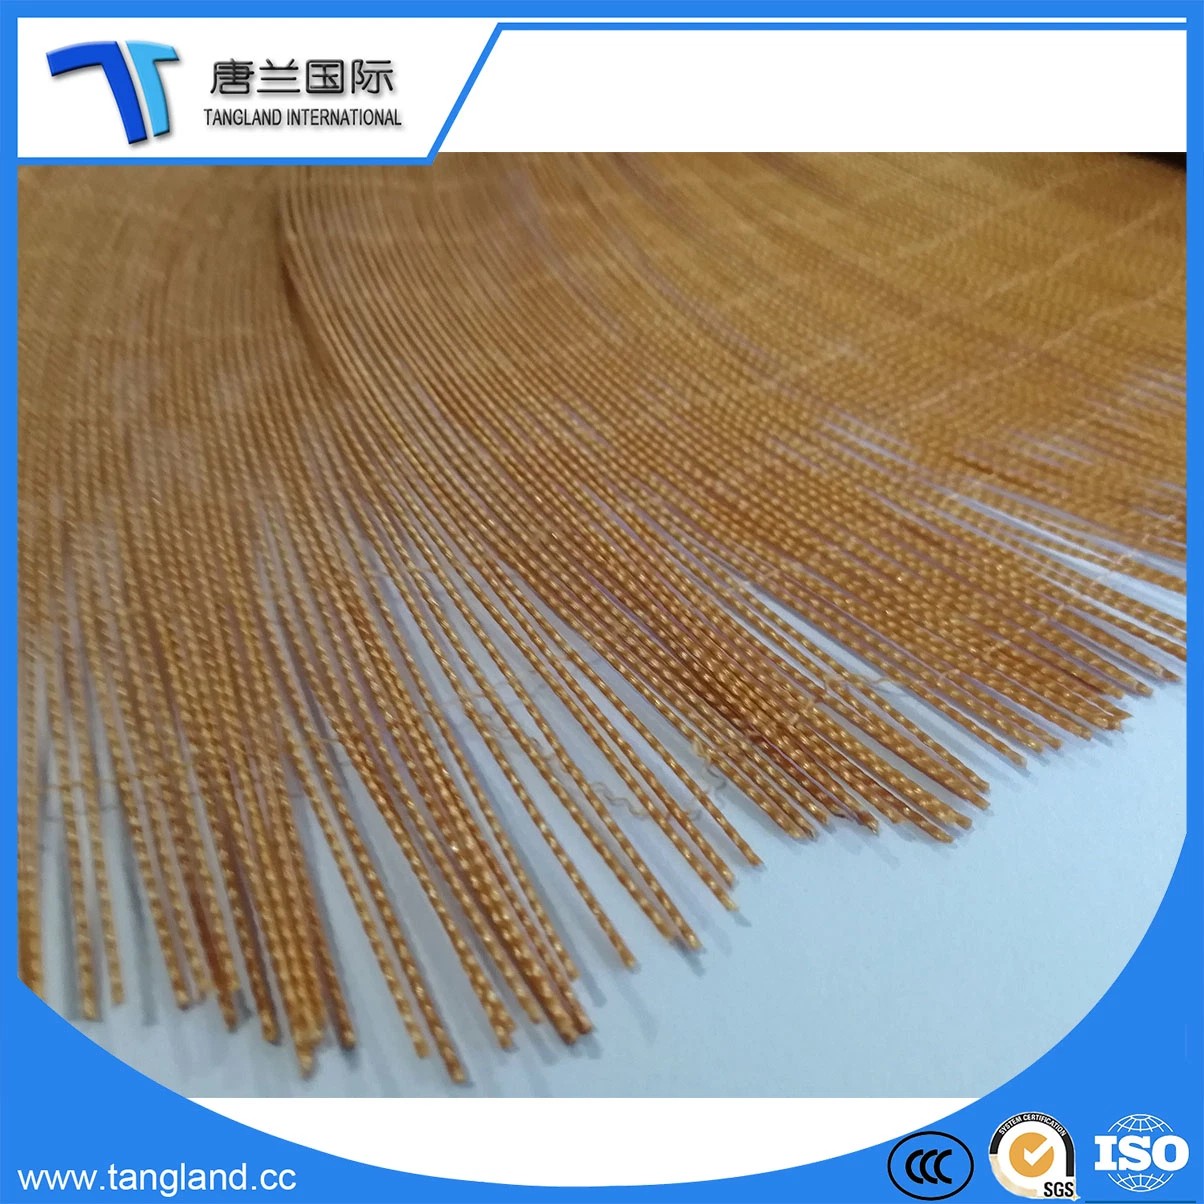 The PA6/ Nylon 6 Dipped Tyre Cord Fabric